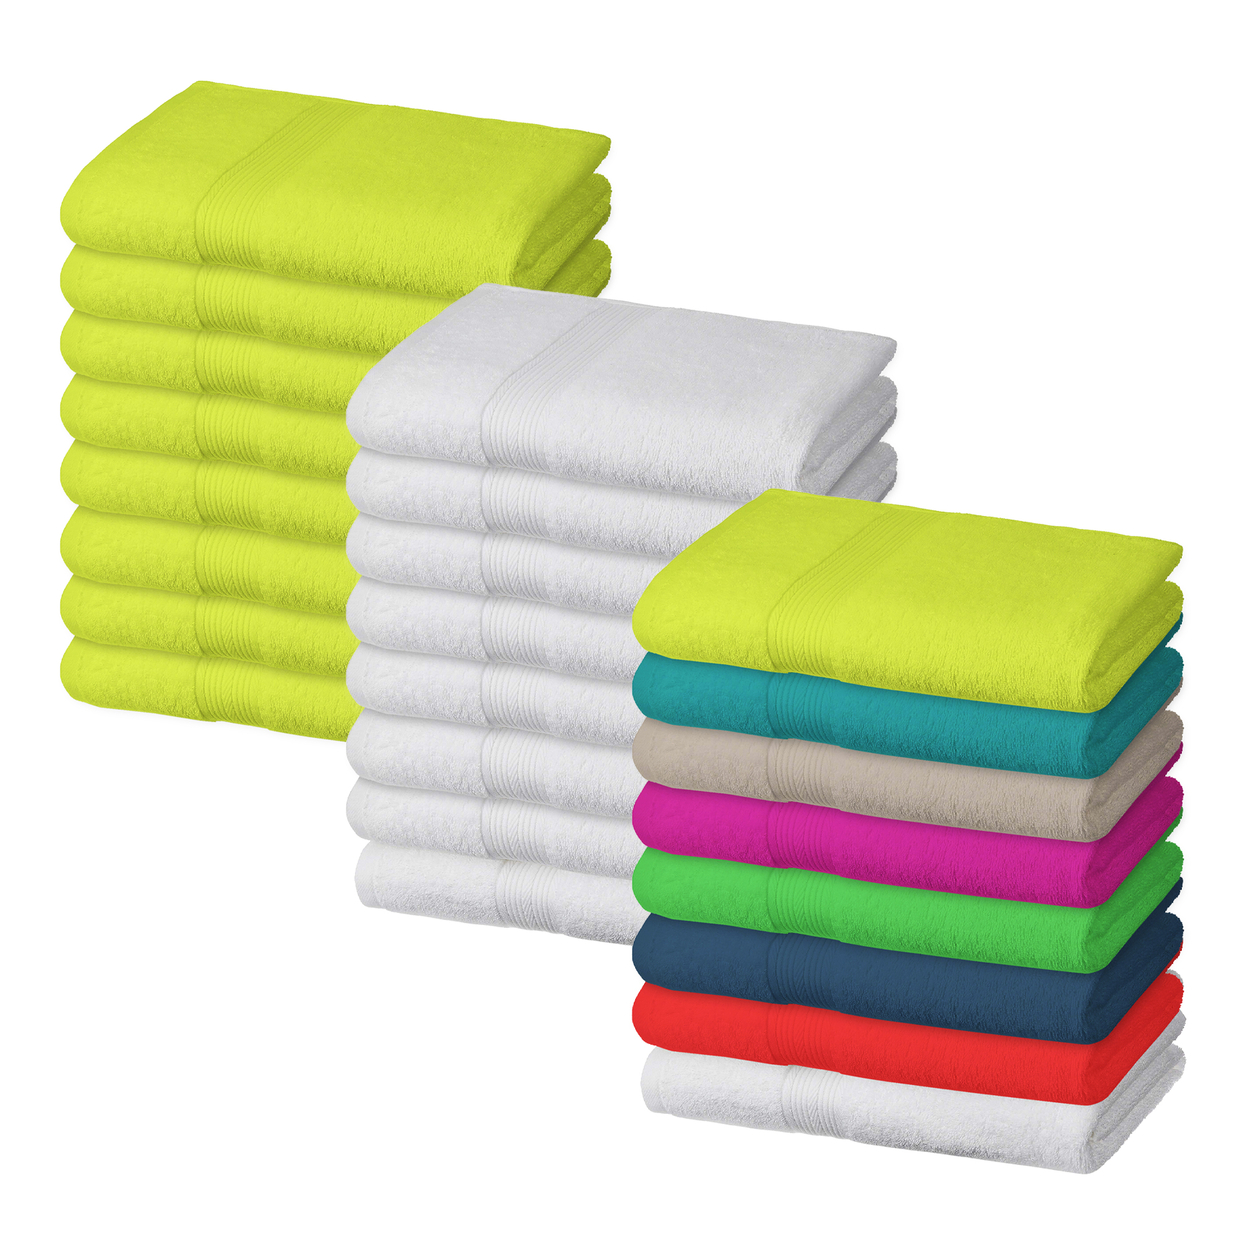 4-Pack: Super Absorbent 100% Cotton 54 X 27 Hotel Beach Bath Towels - Yellow